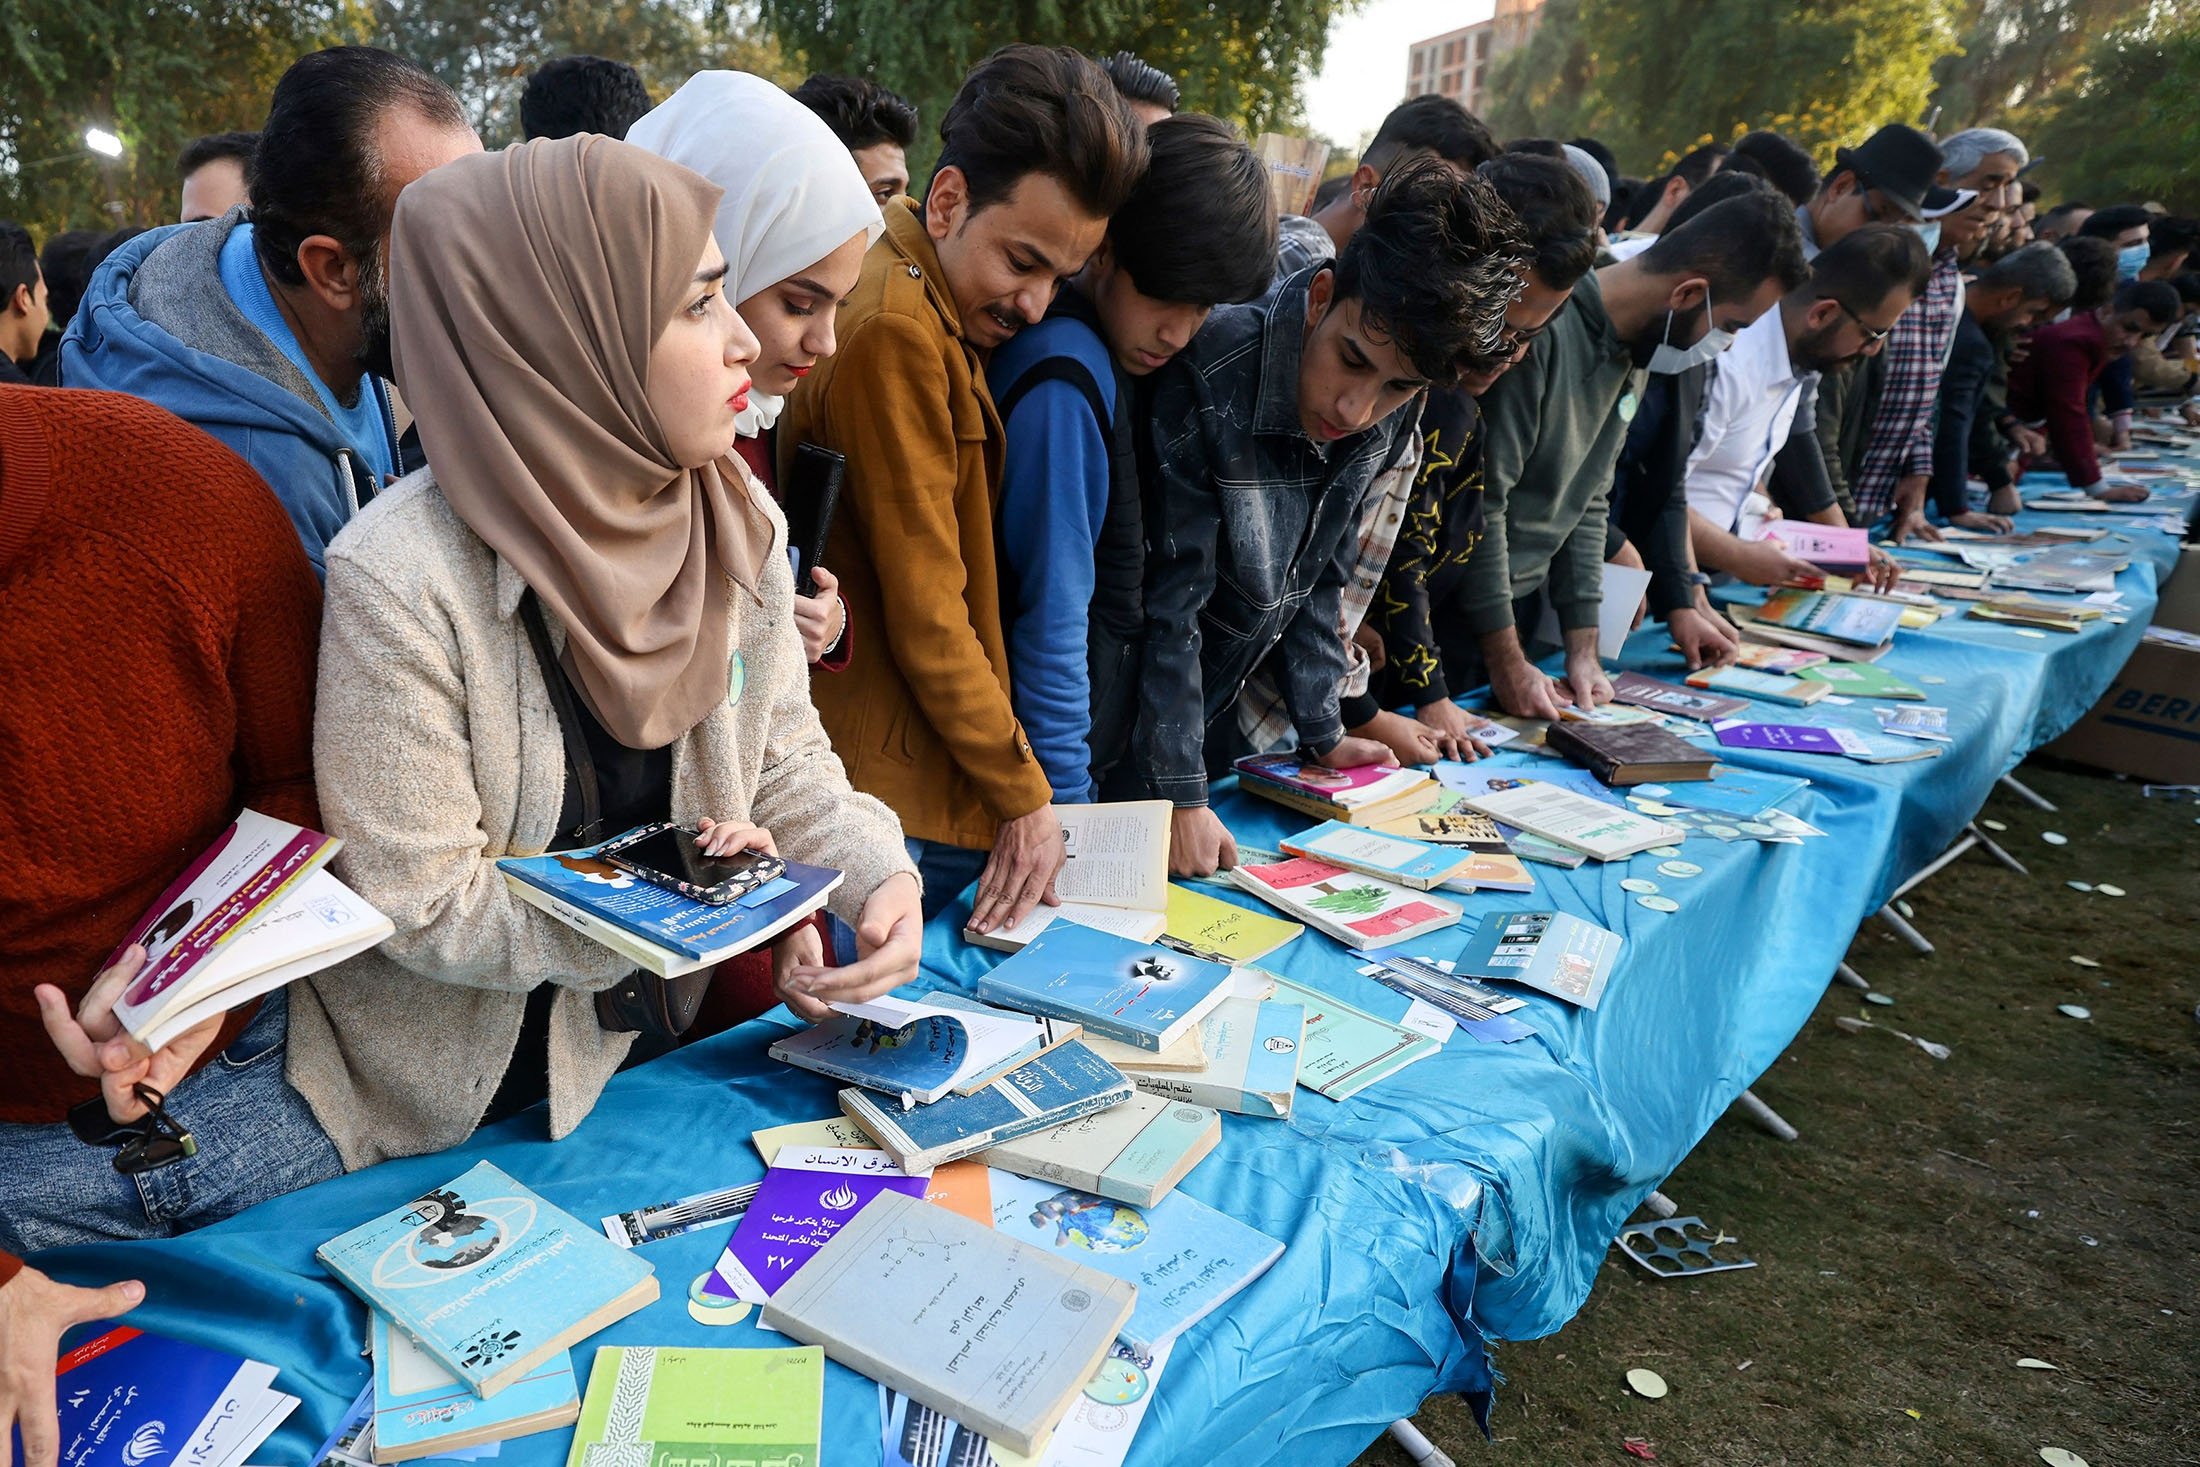 Iraqis browse through books during the eighth edition of an annual book festival in the Abu Nawas street, known for its bookshops and book stalls, along the banks of the Tigris, in the capital Baghdad, Iraq, Nov. 27, 2021. (AFP Photo)